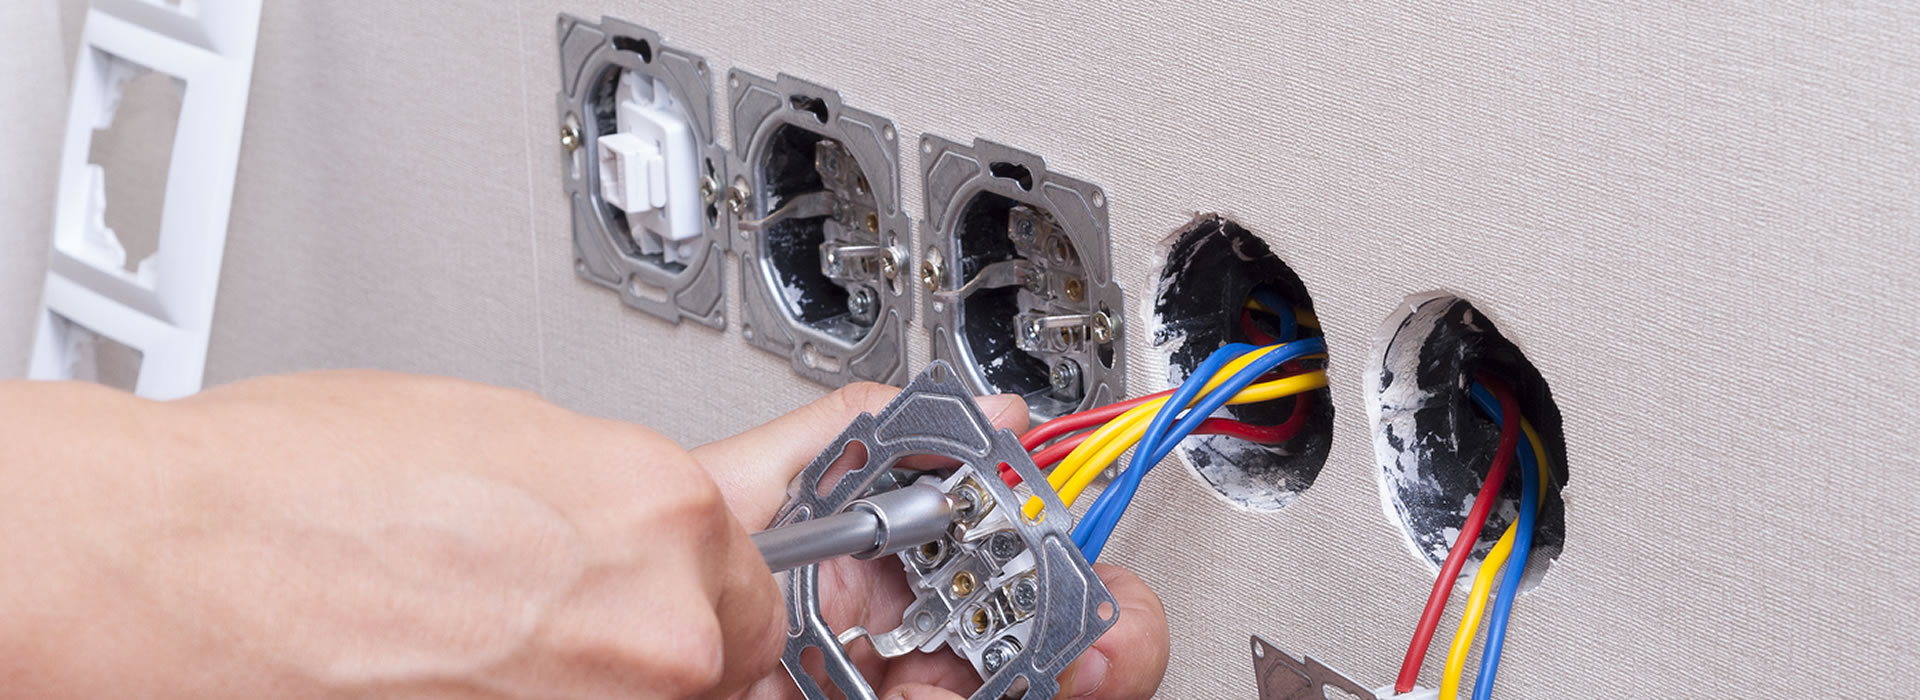 Electrical Outlet Replacement in Brentwood, NY